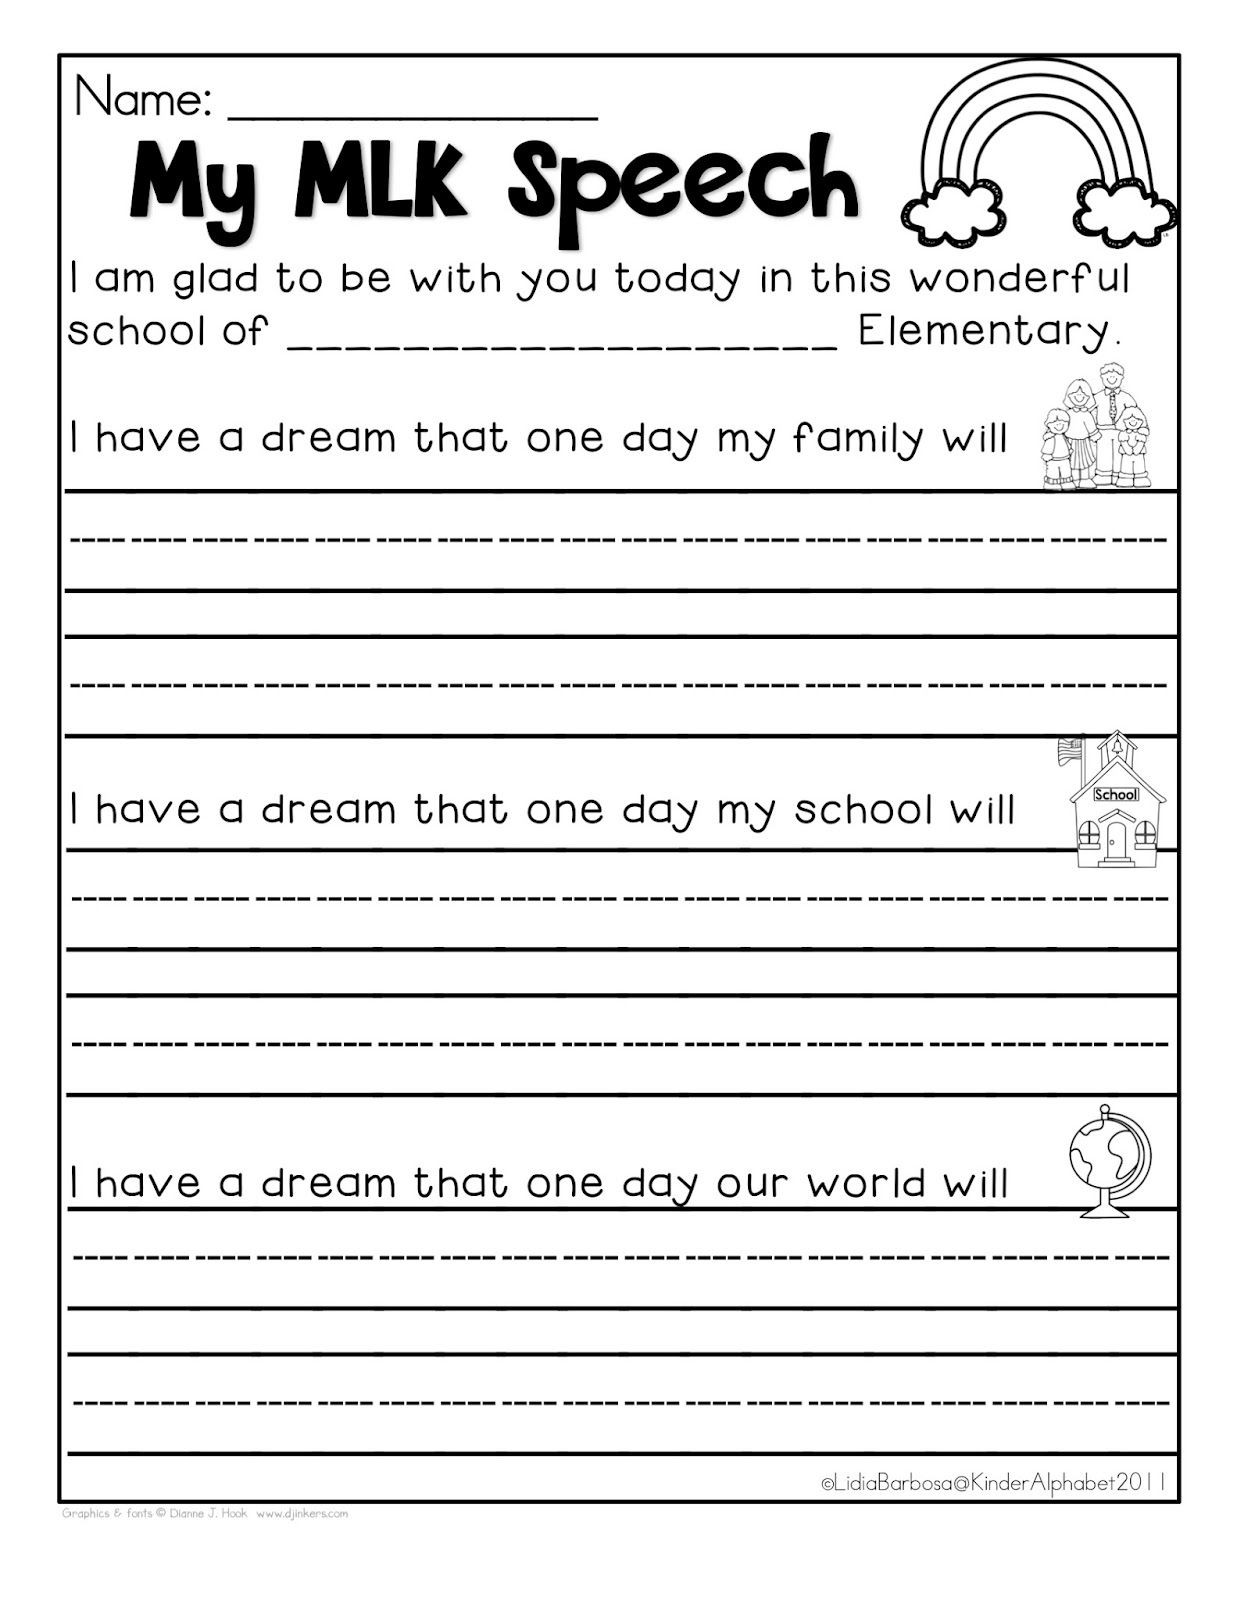 I Have A Dream Worksheet Freebielicious Martin Luther King Jr Freebie I Have A